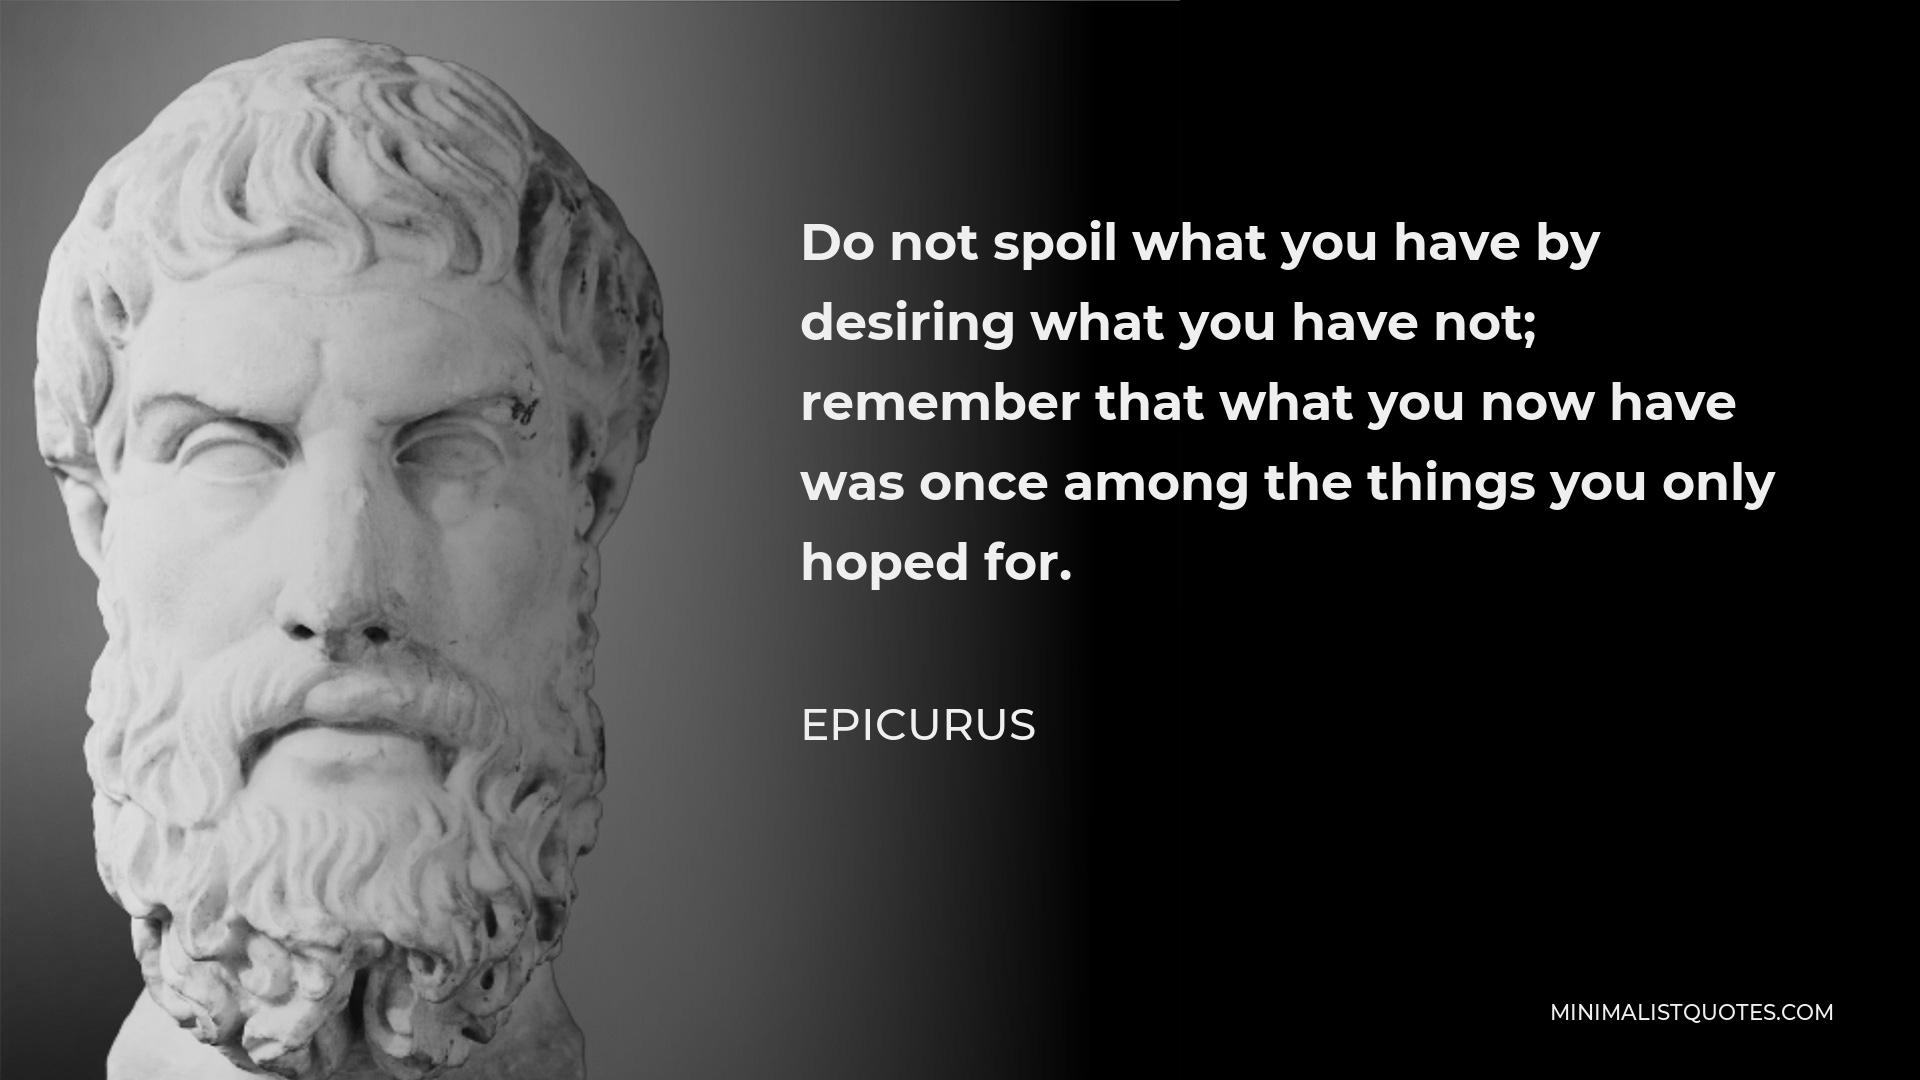 Epicurus Quote - Do not spoil what you have by desiring what you have not; remember that what you now have was once among the things you only hoped for.